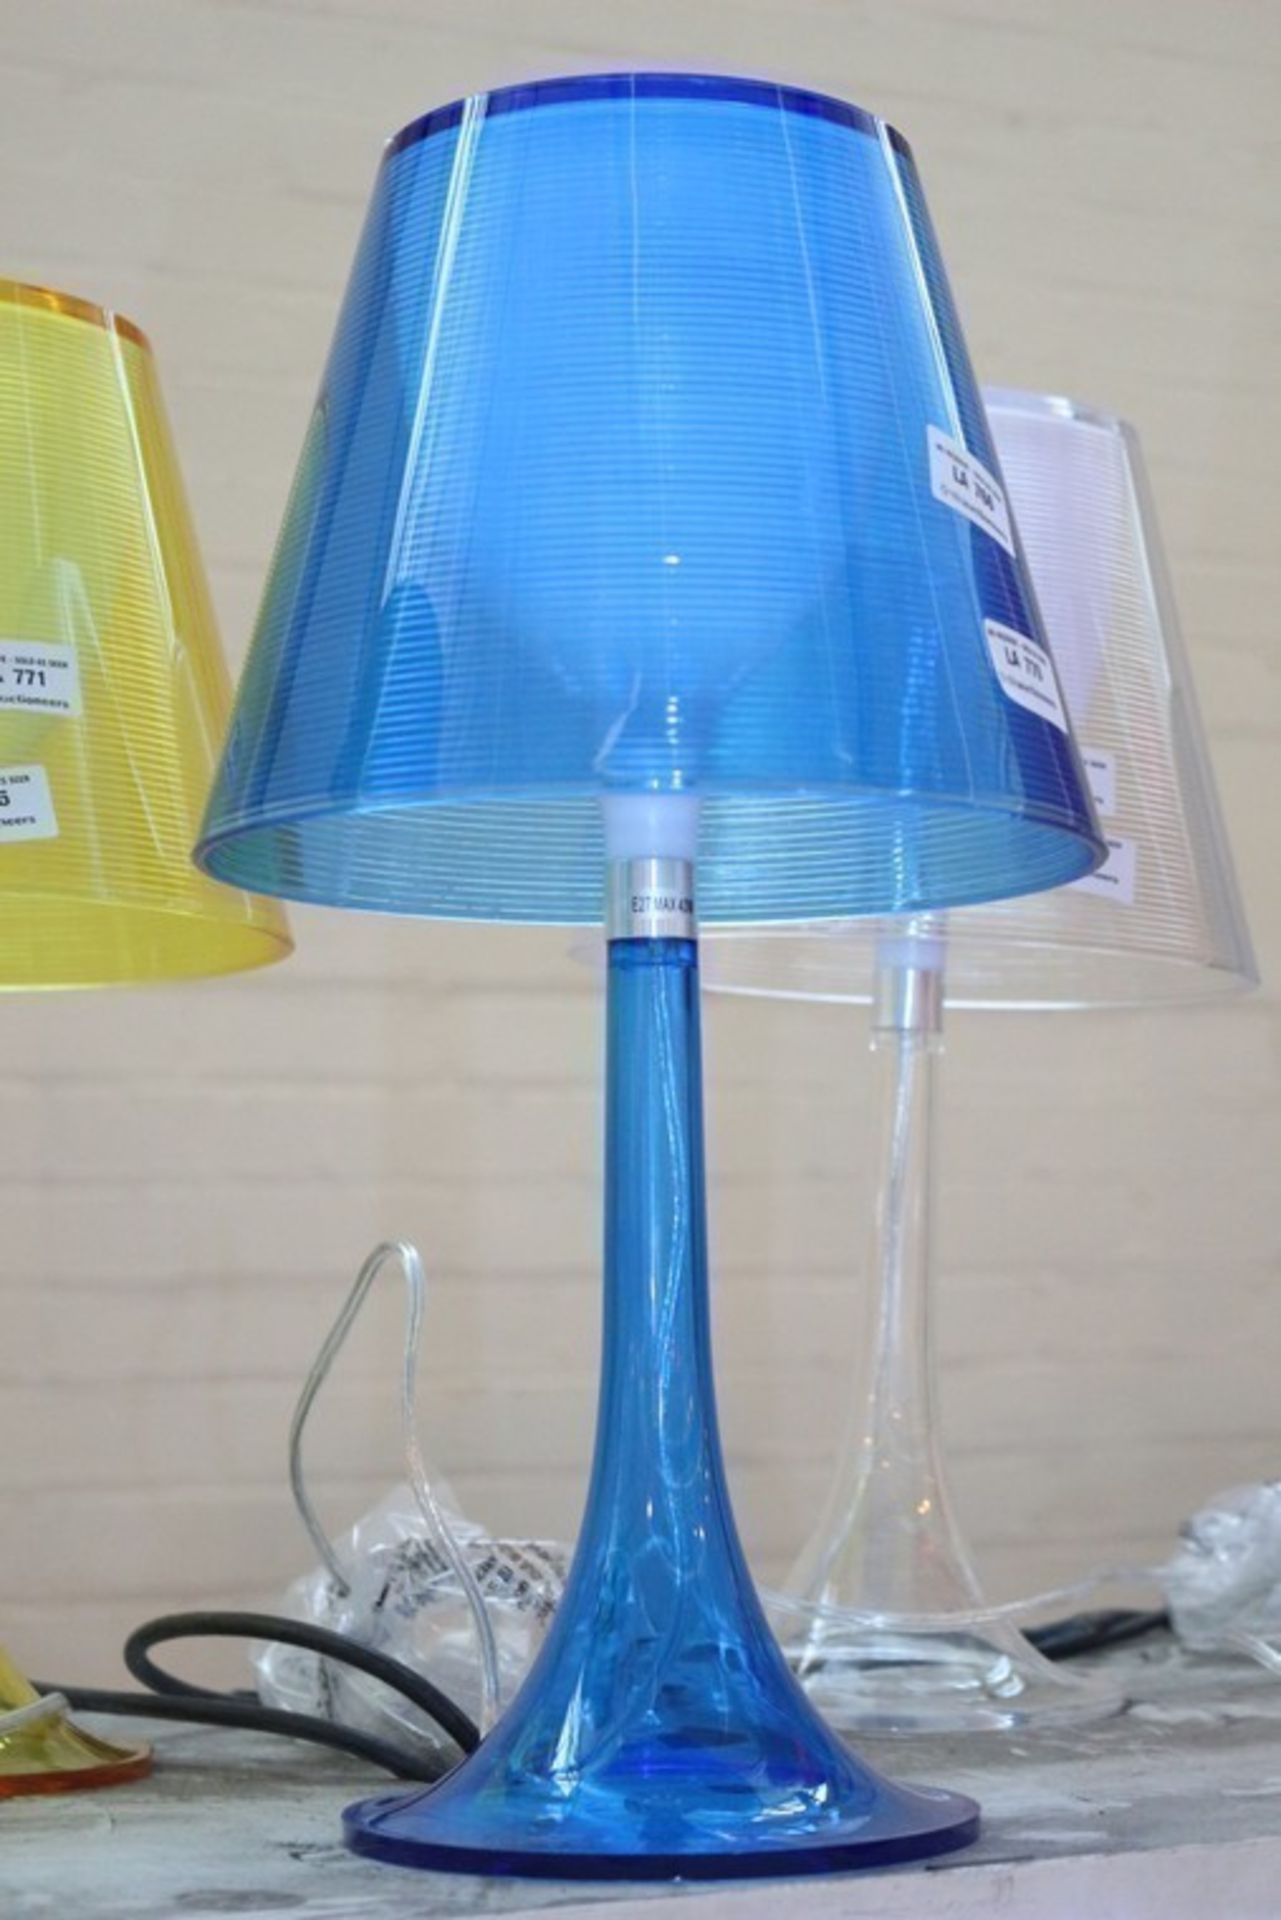 1 x MISS KT STYLE MINI TABLE LAMP IN BLUE (013) *PLEASE NOTE THAT THE BID PRICE IS MULTIPLIED BY THE